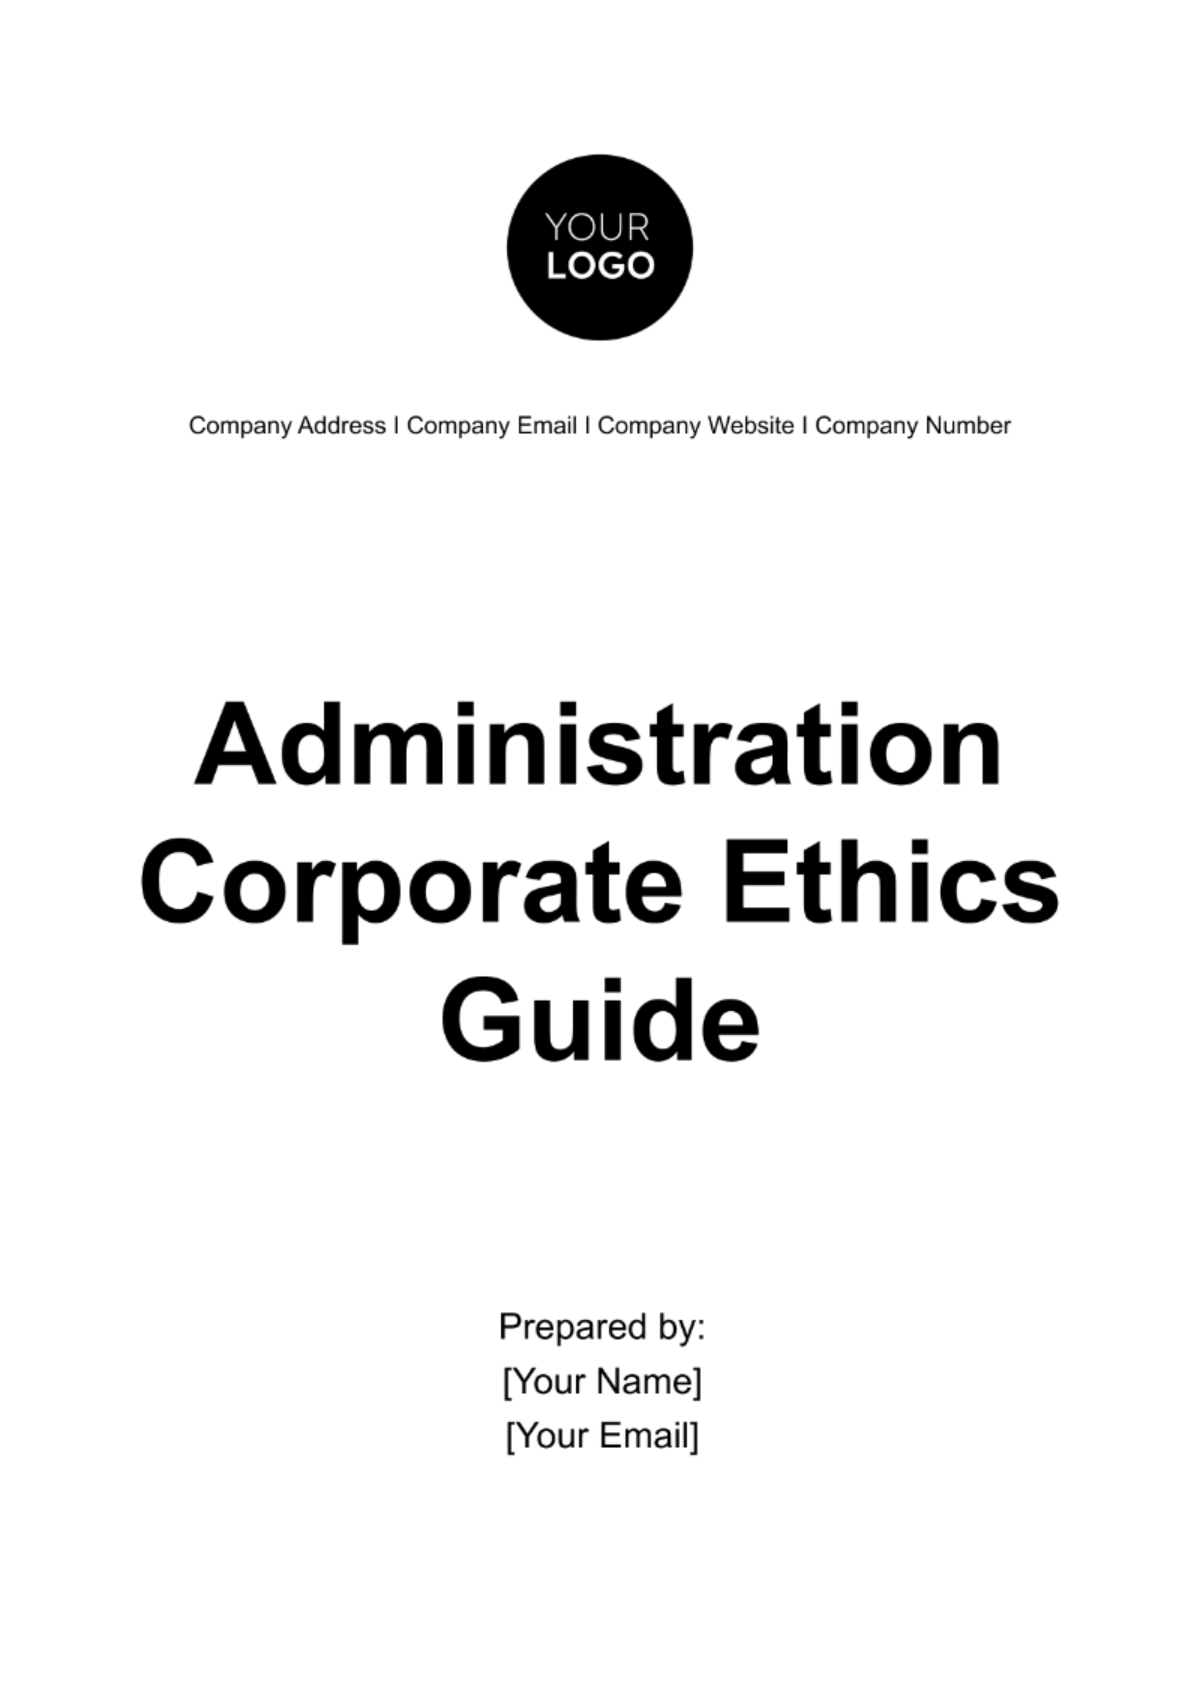 Administration Corporate Ethics Guide Template